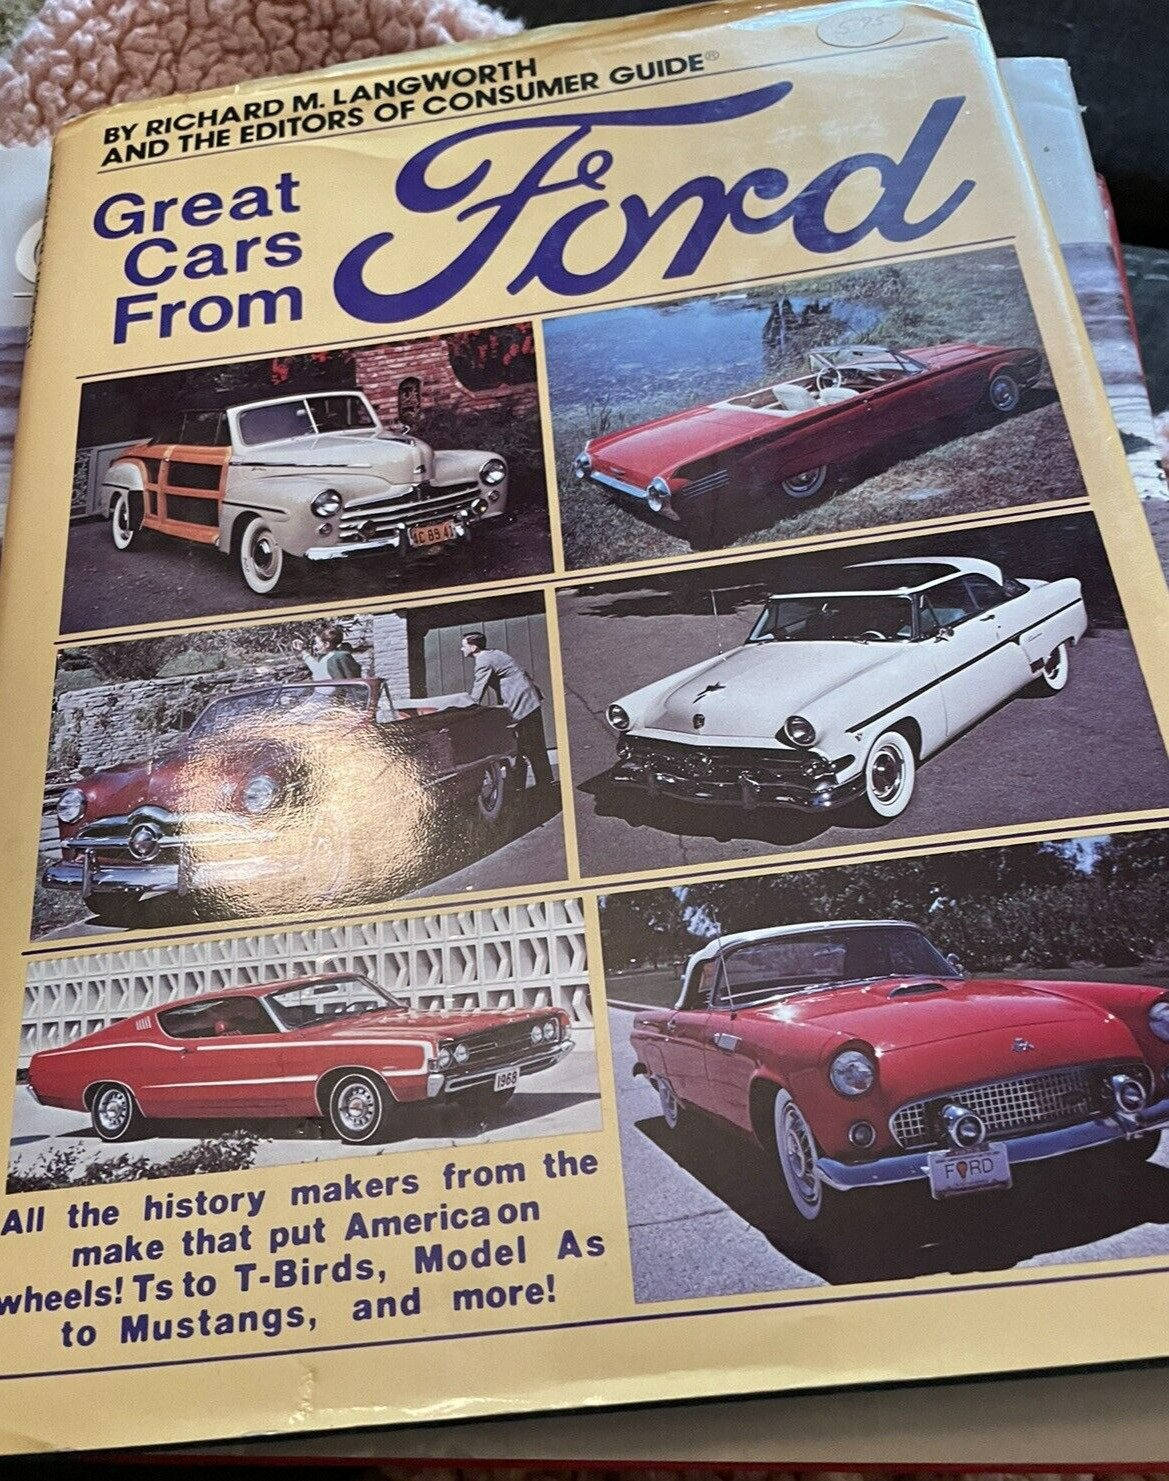 Great Cars from Ford by Richard M.Langworth(1982, Hardcover)w/Dust Jacket